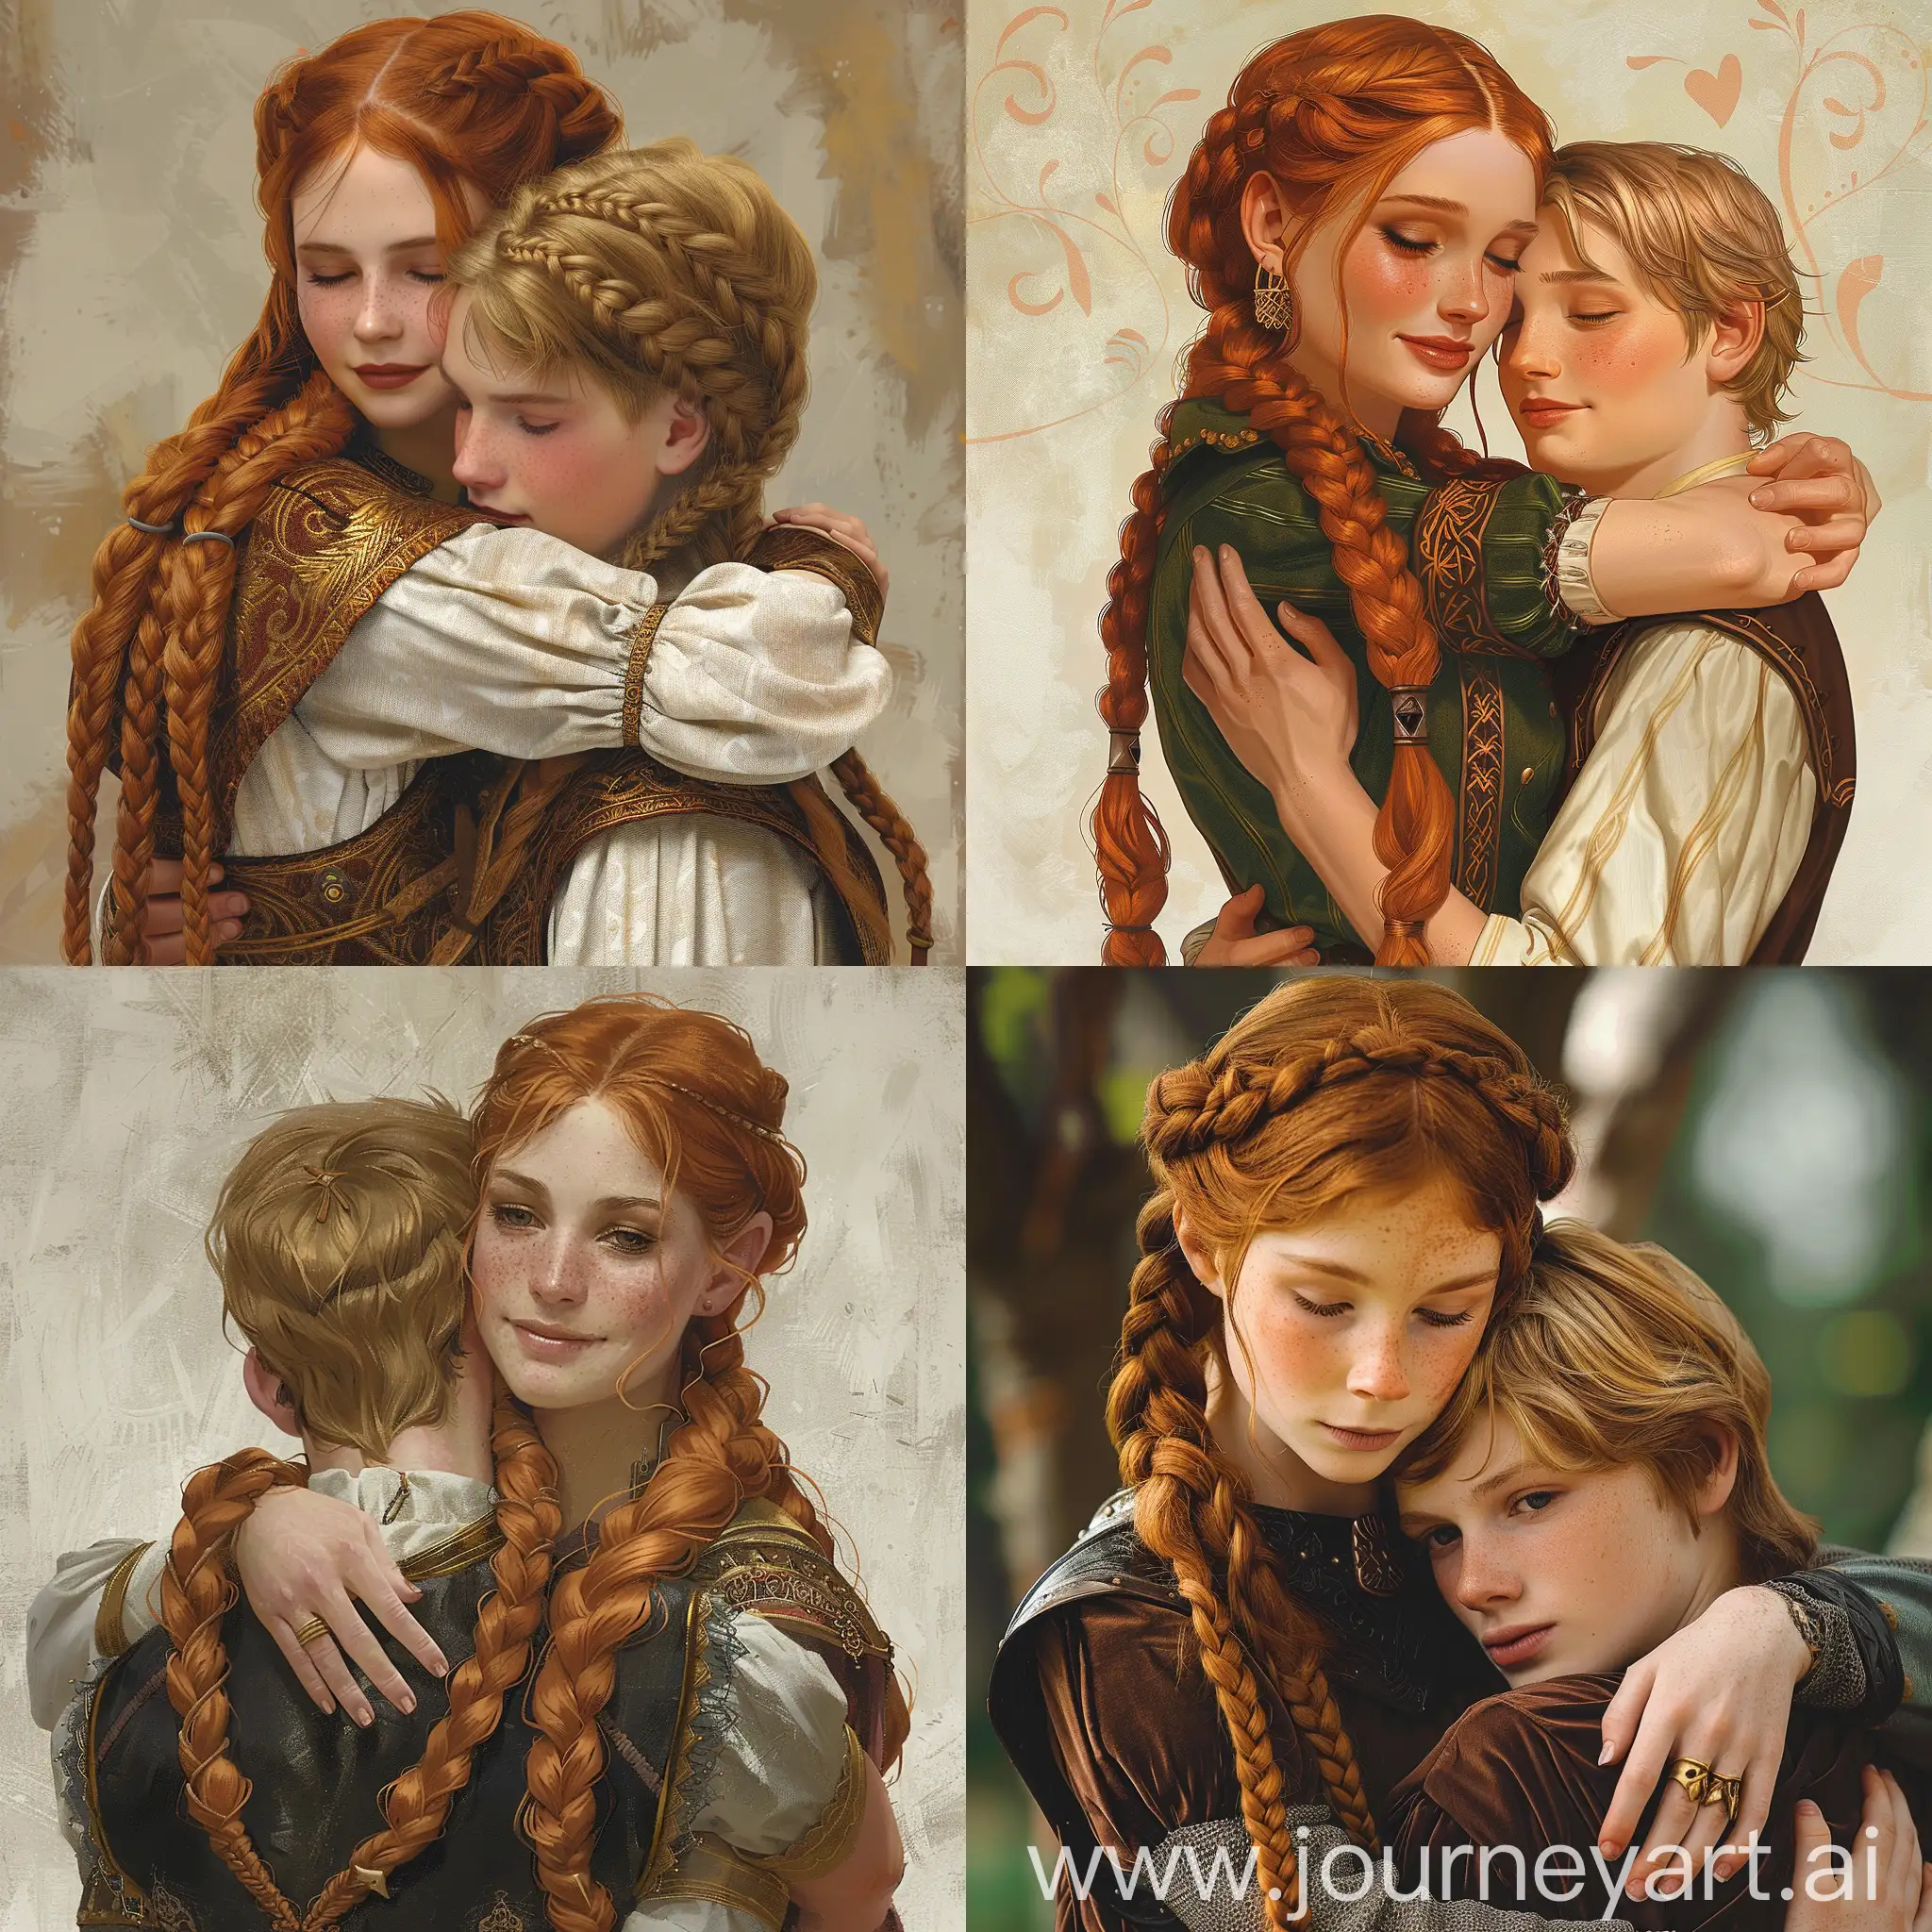 Seductive-GingerHaired-Maiden-Embracing-Blond-Knight-Medieval-Romance-Novel-Cover-Art